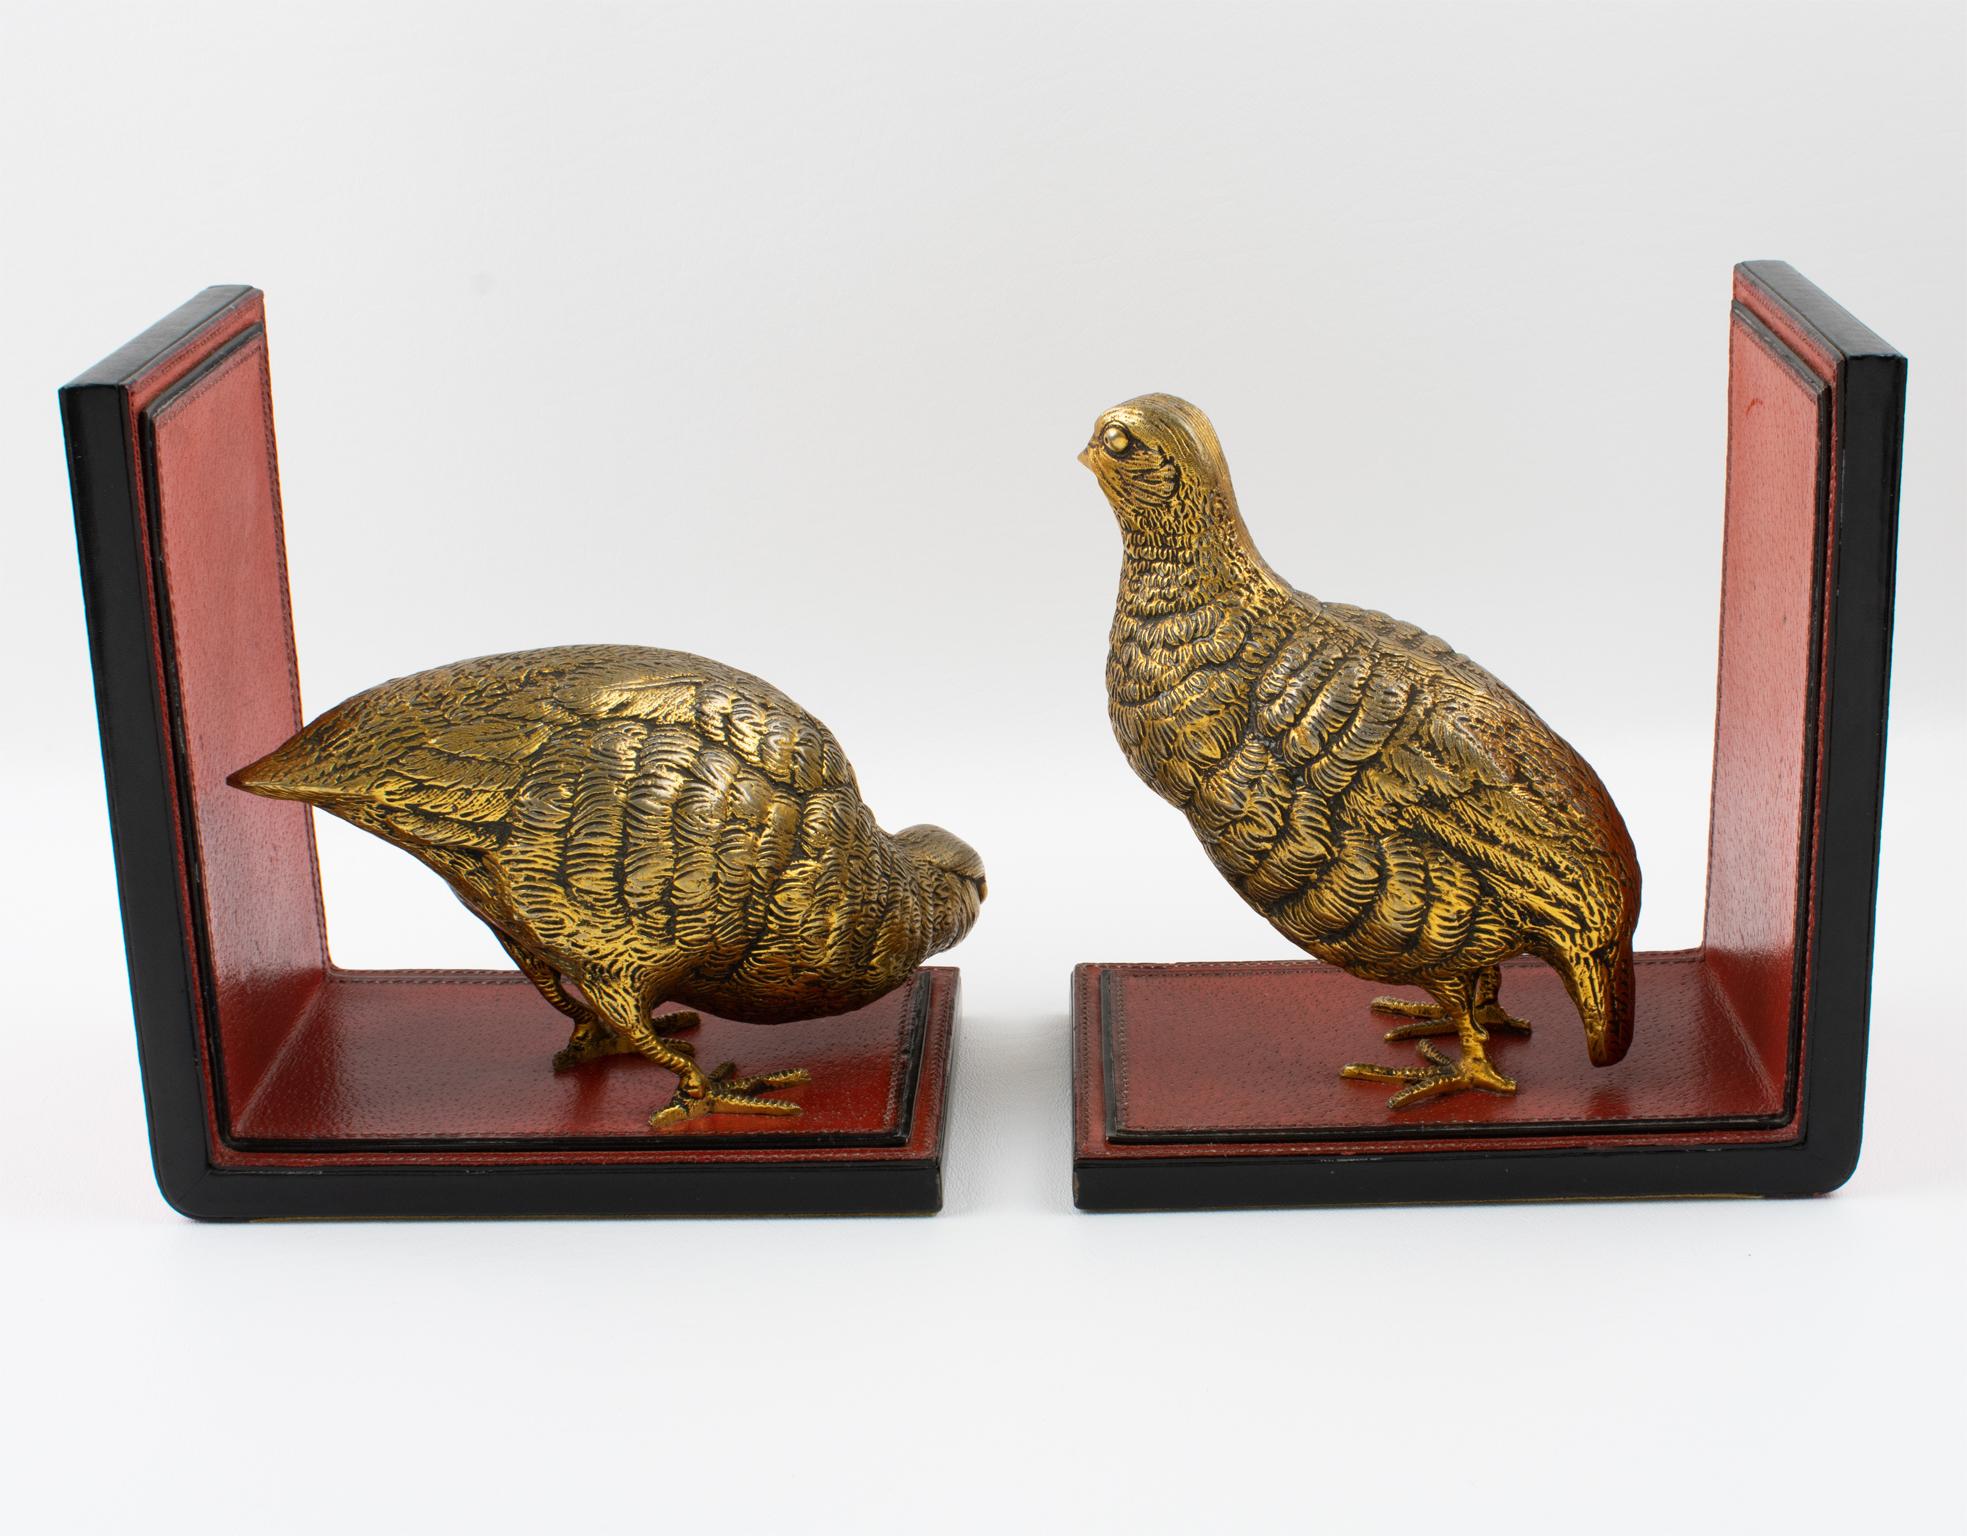 Gucci Italy Hand-Stitched Red Leather Bookends with Gilt Metal Partridges, 1970s In Good Condition For Sale In Atlanta, GA